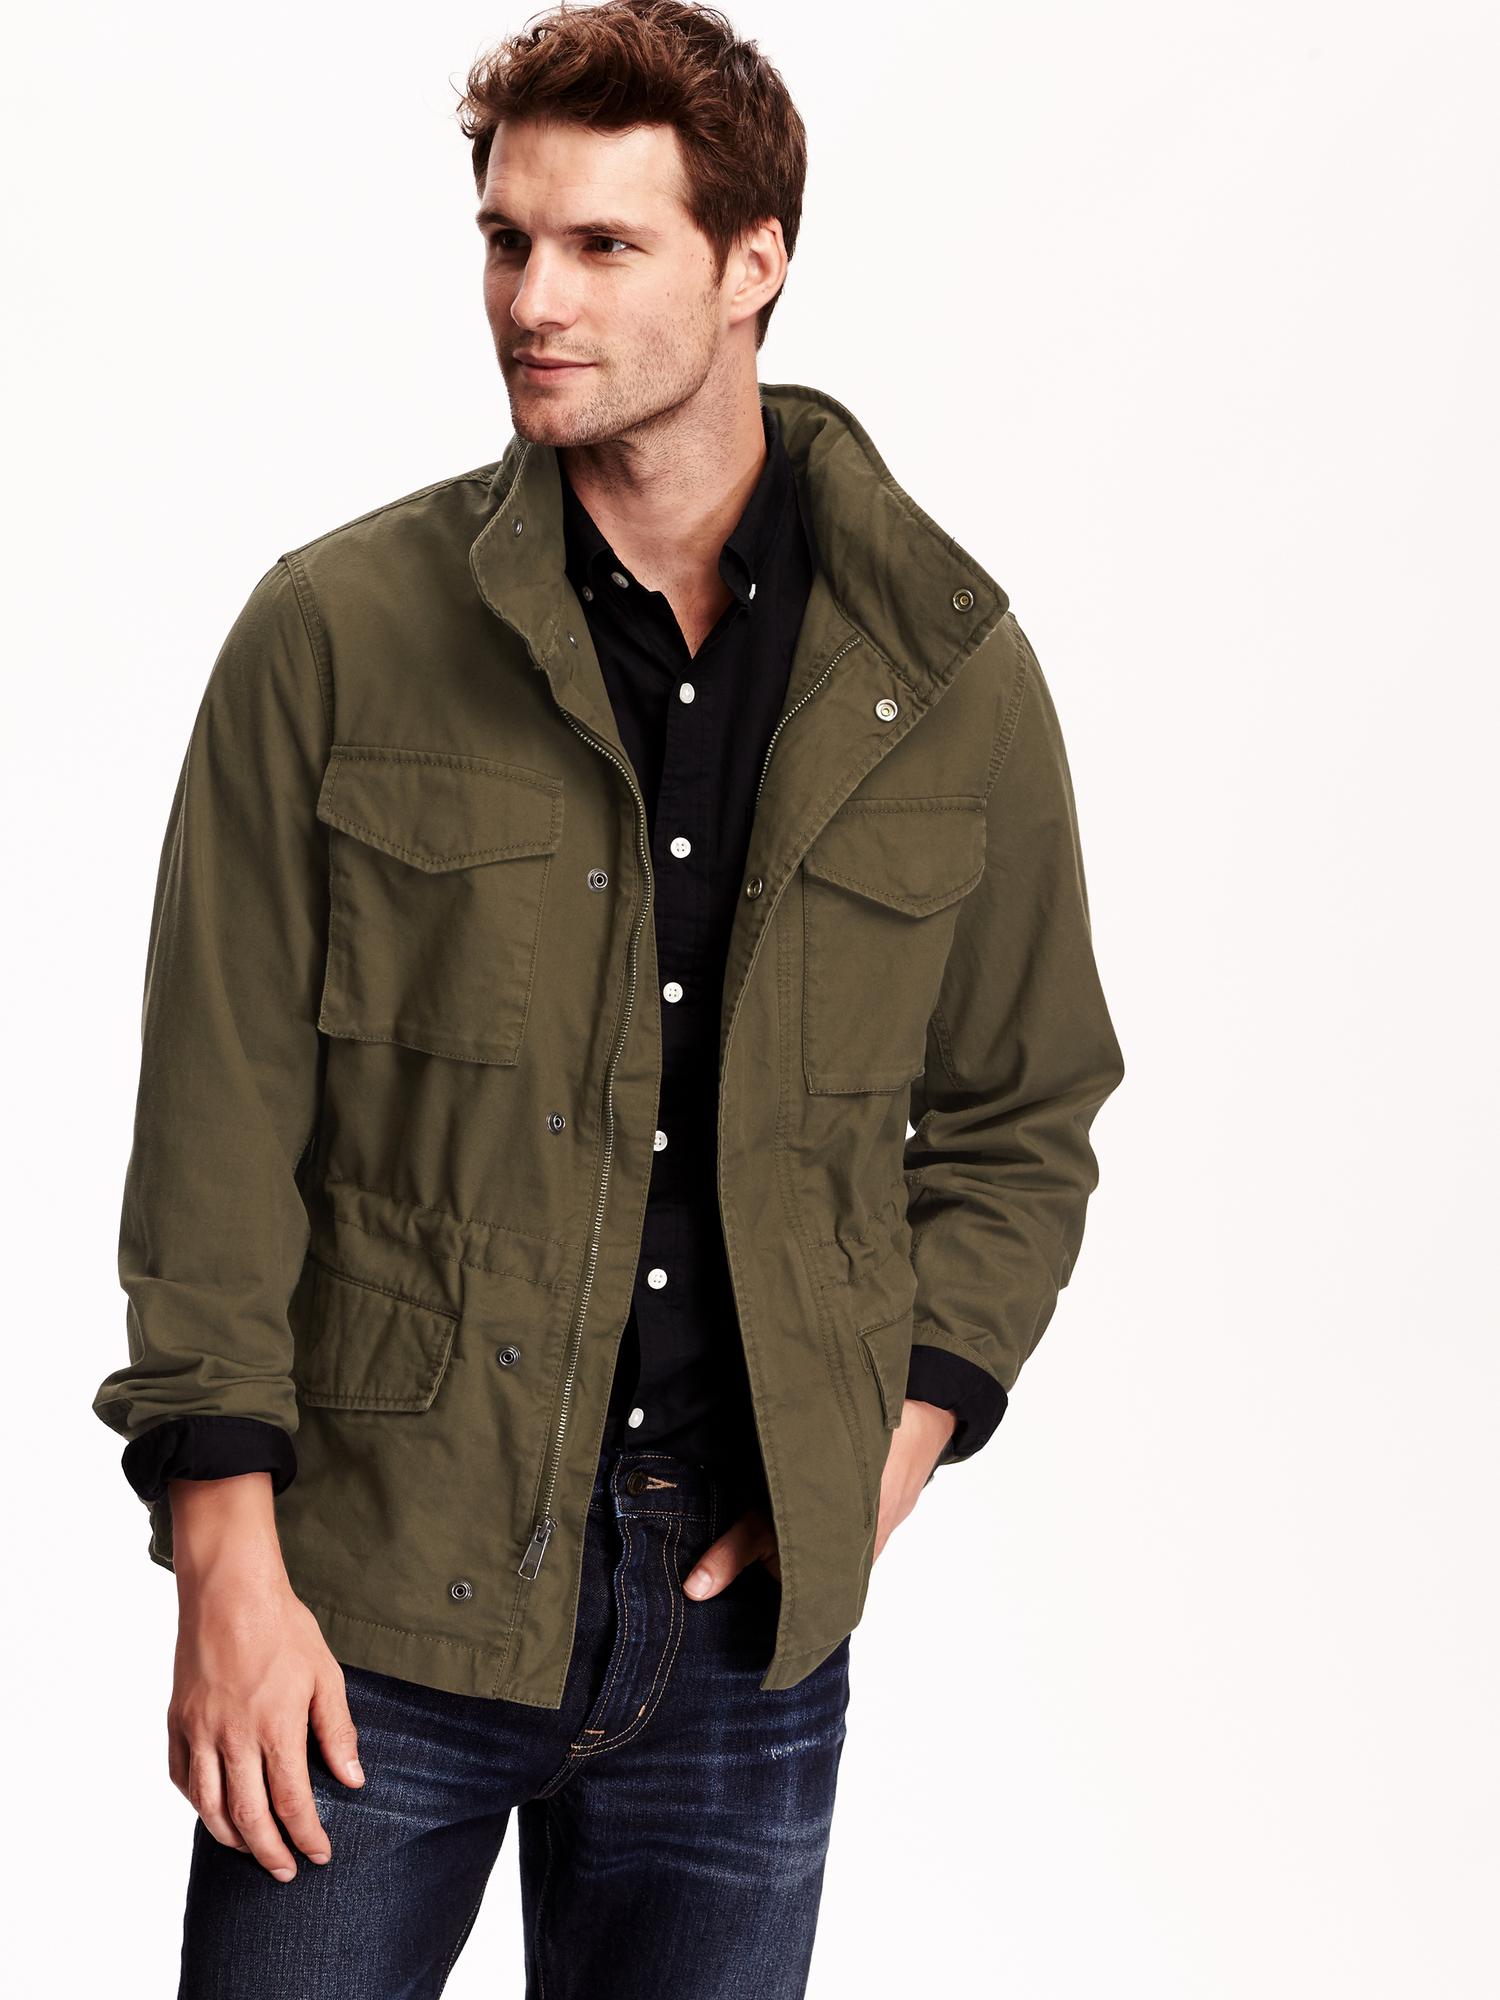 Men's Canvas Military Jackets | Old Navy